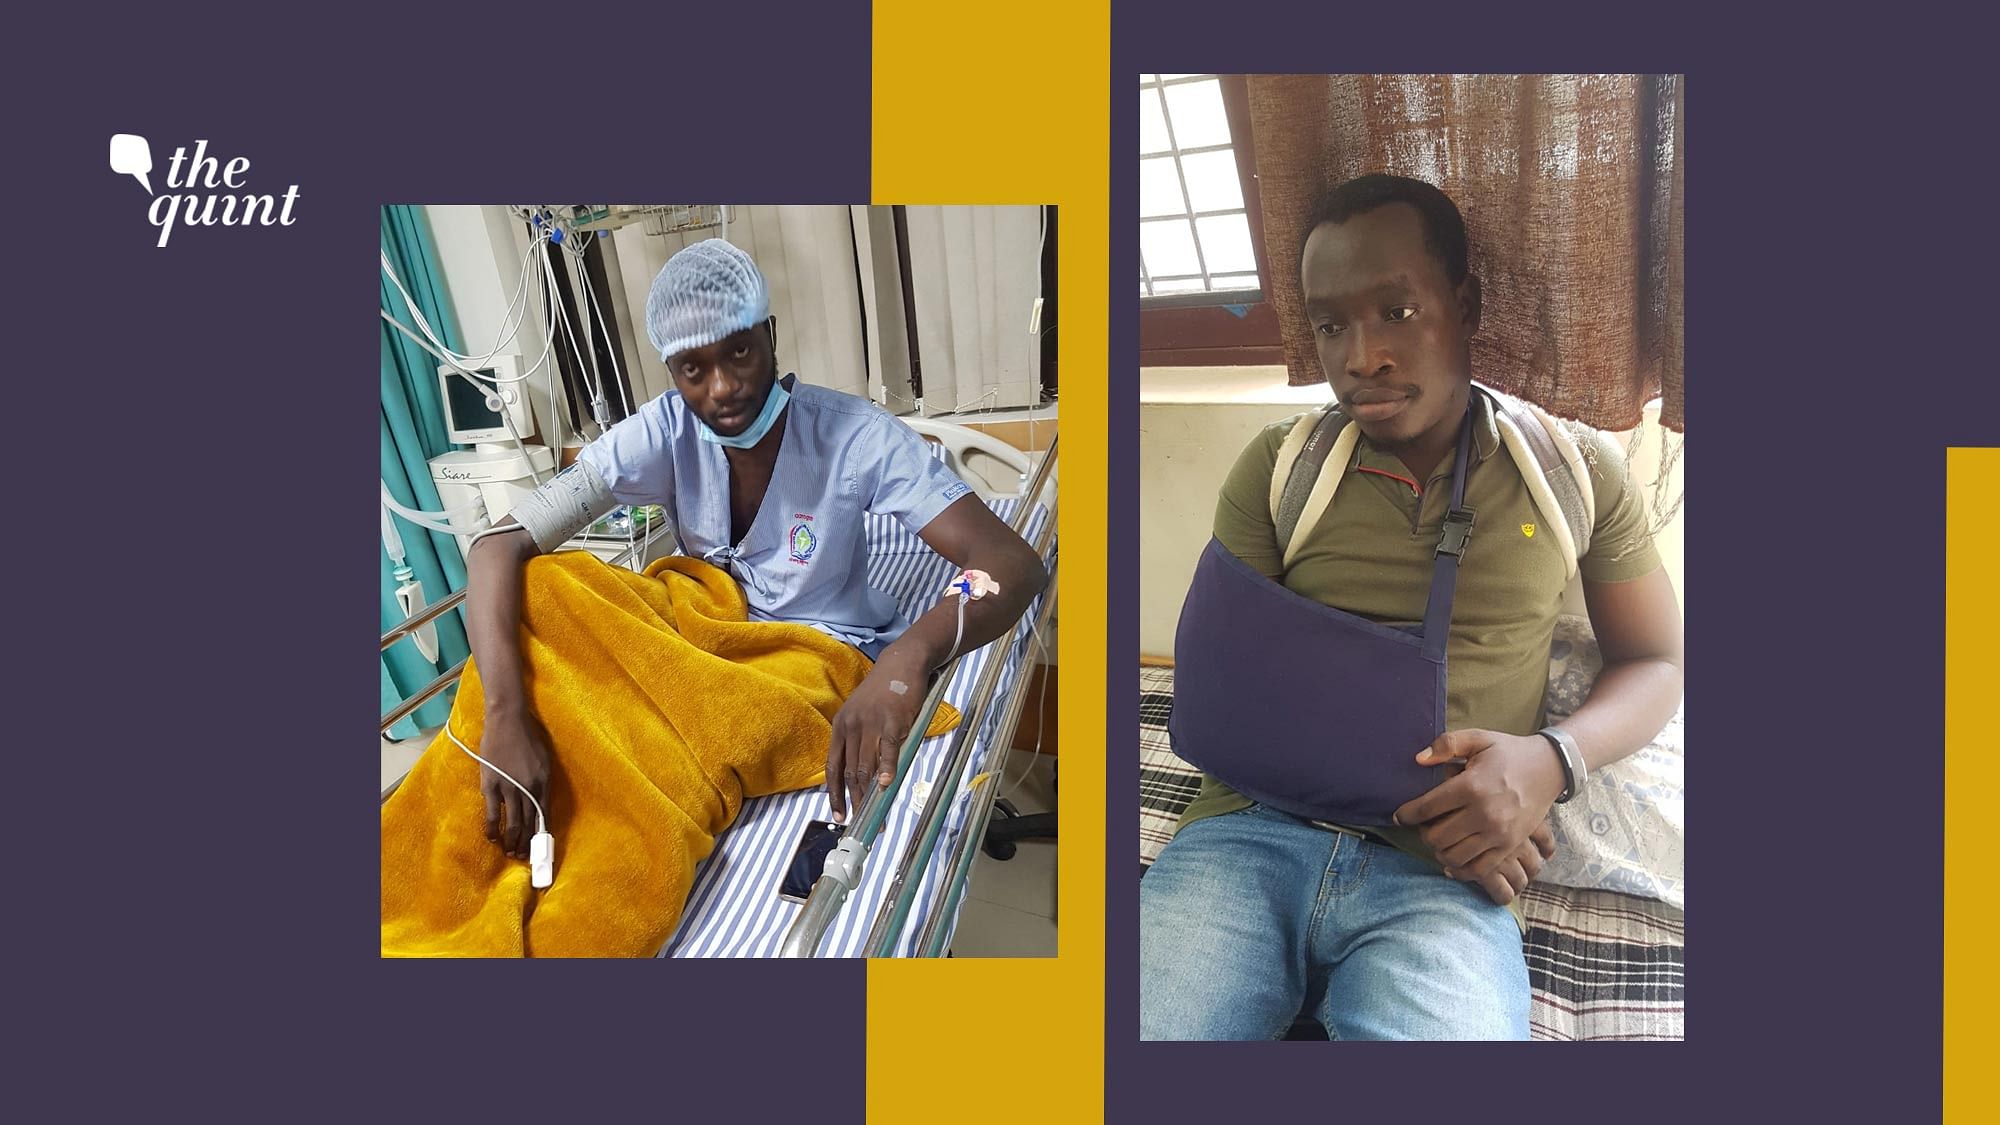 Ibrahim and Benjamin, two African students, were attacked in Roorkee Institute of Technology.